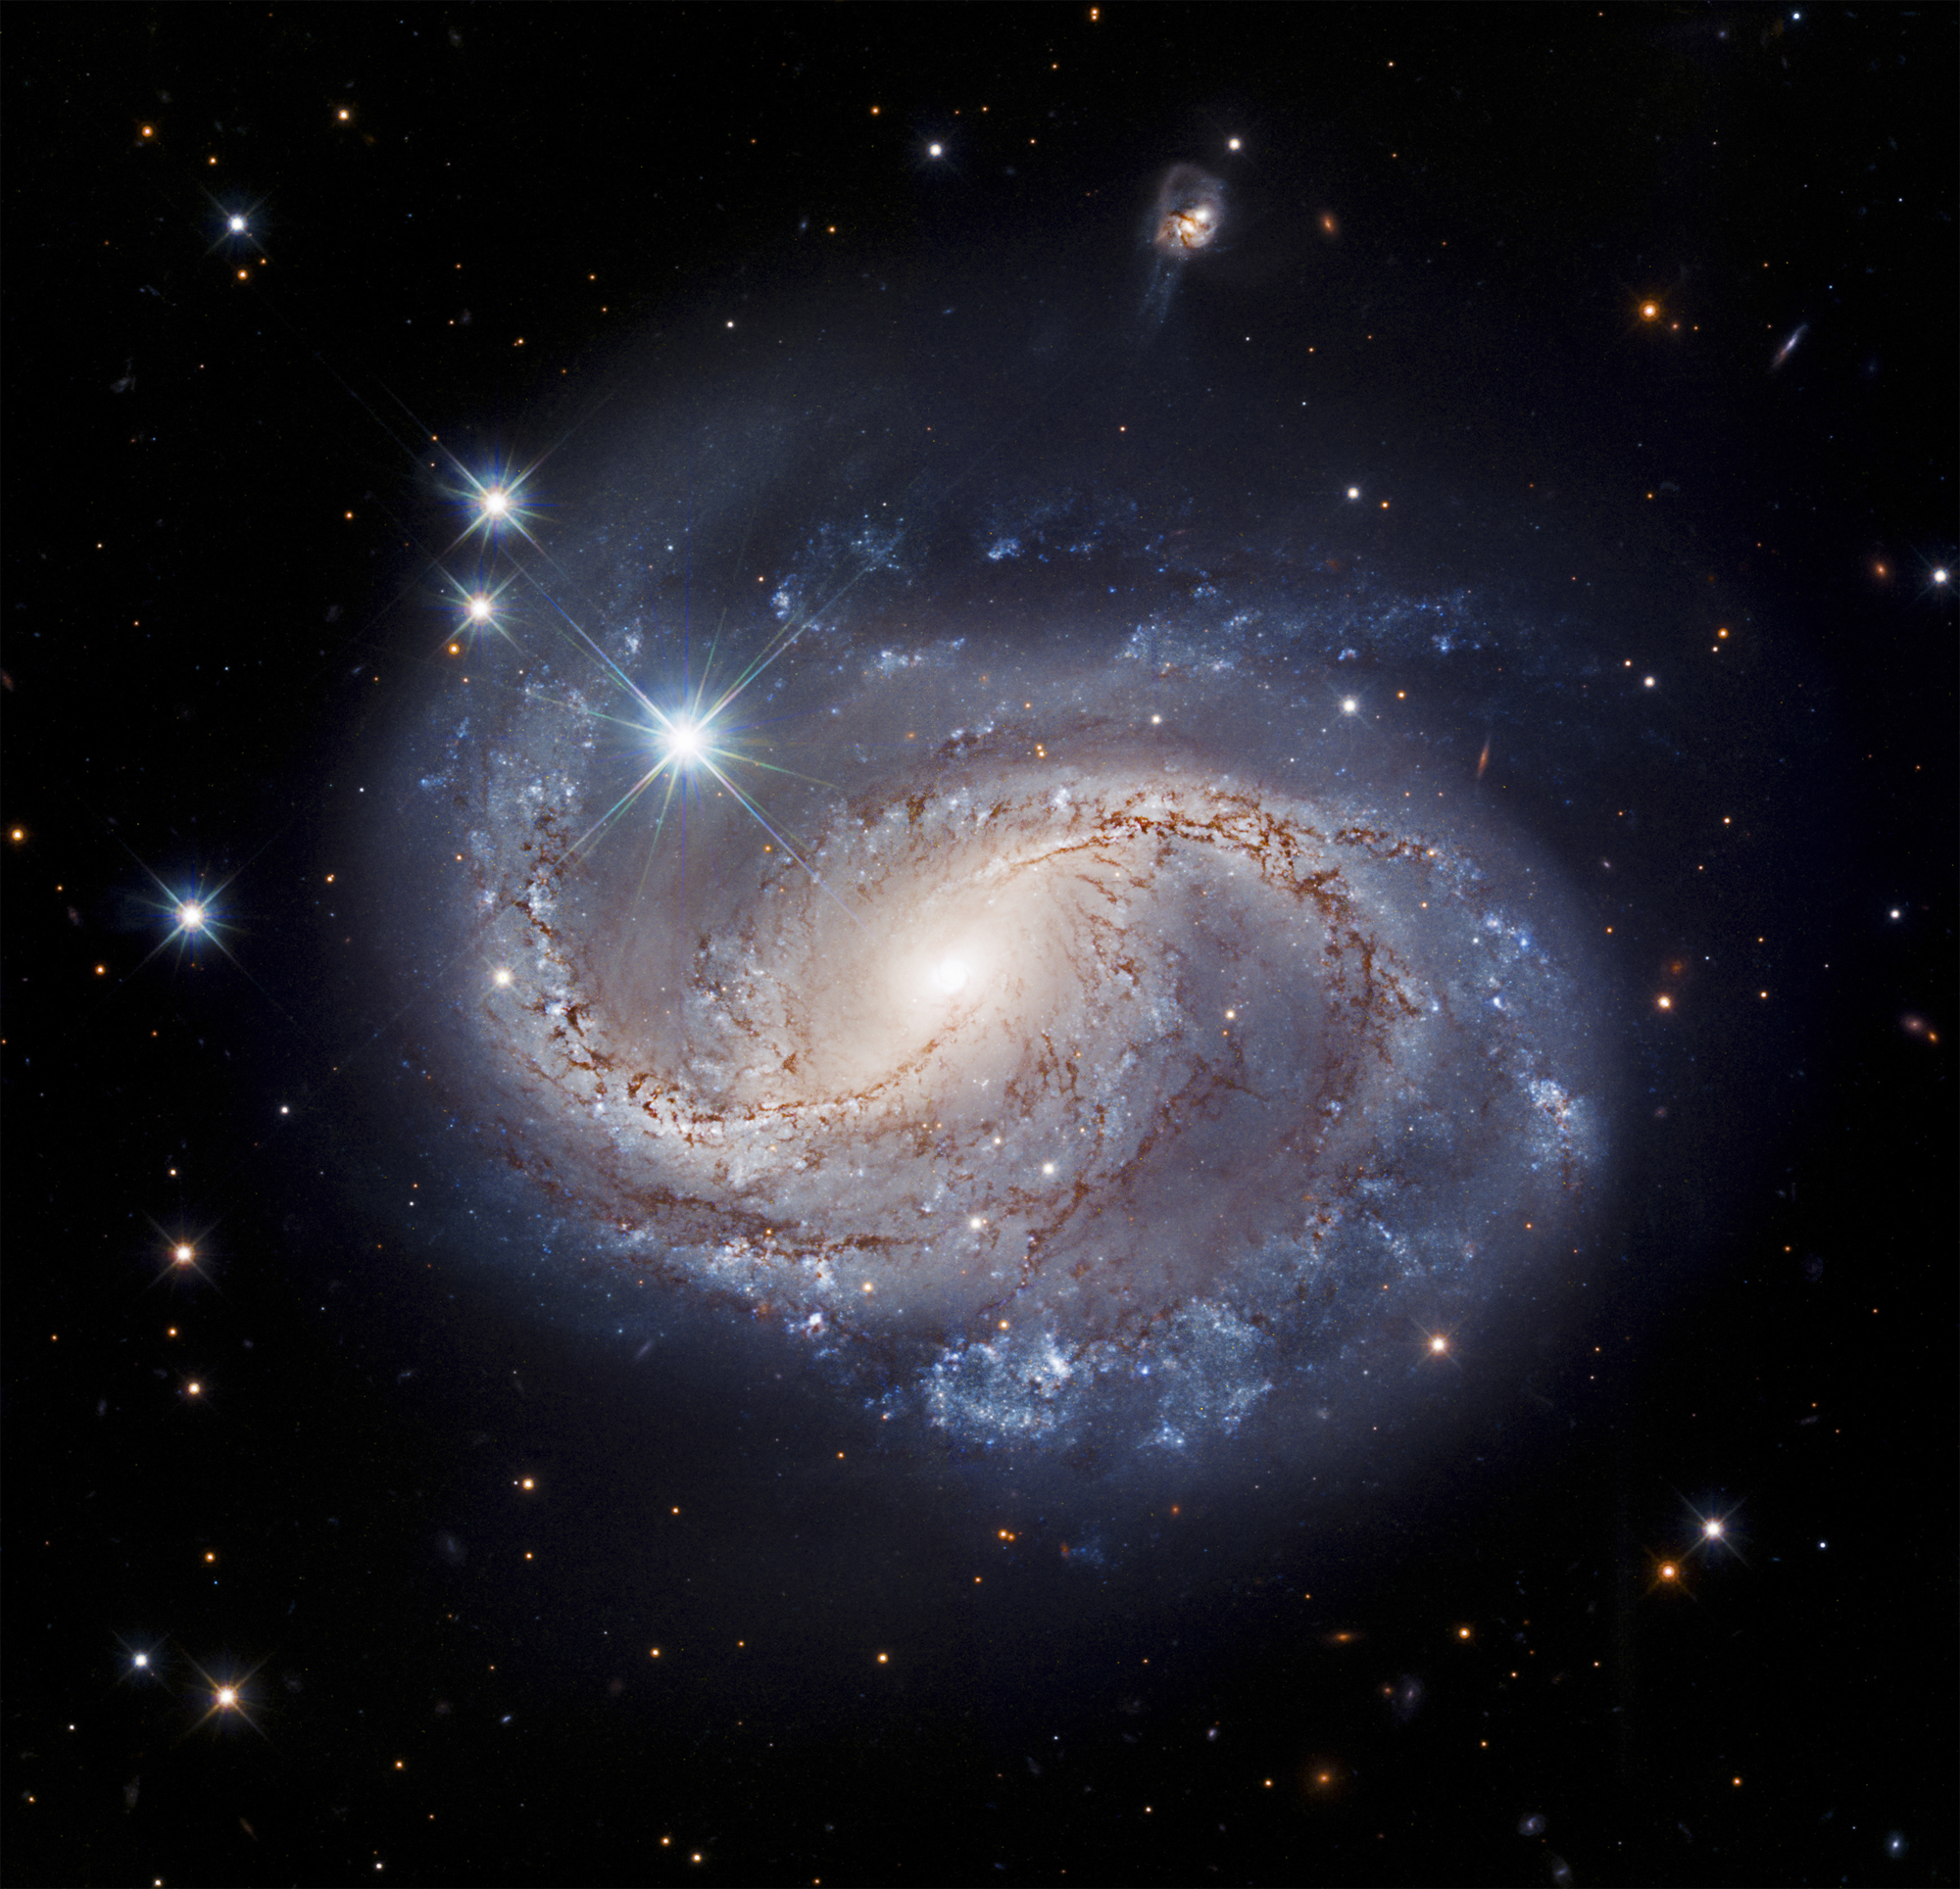 Hubble Space Telescope image of spiral galaxy NGC 6956.